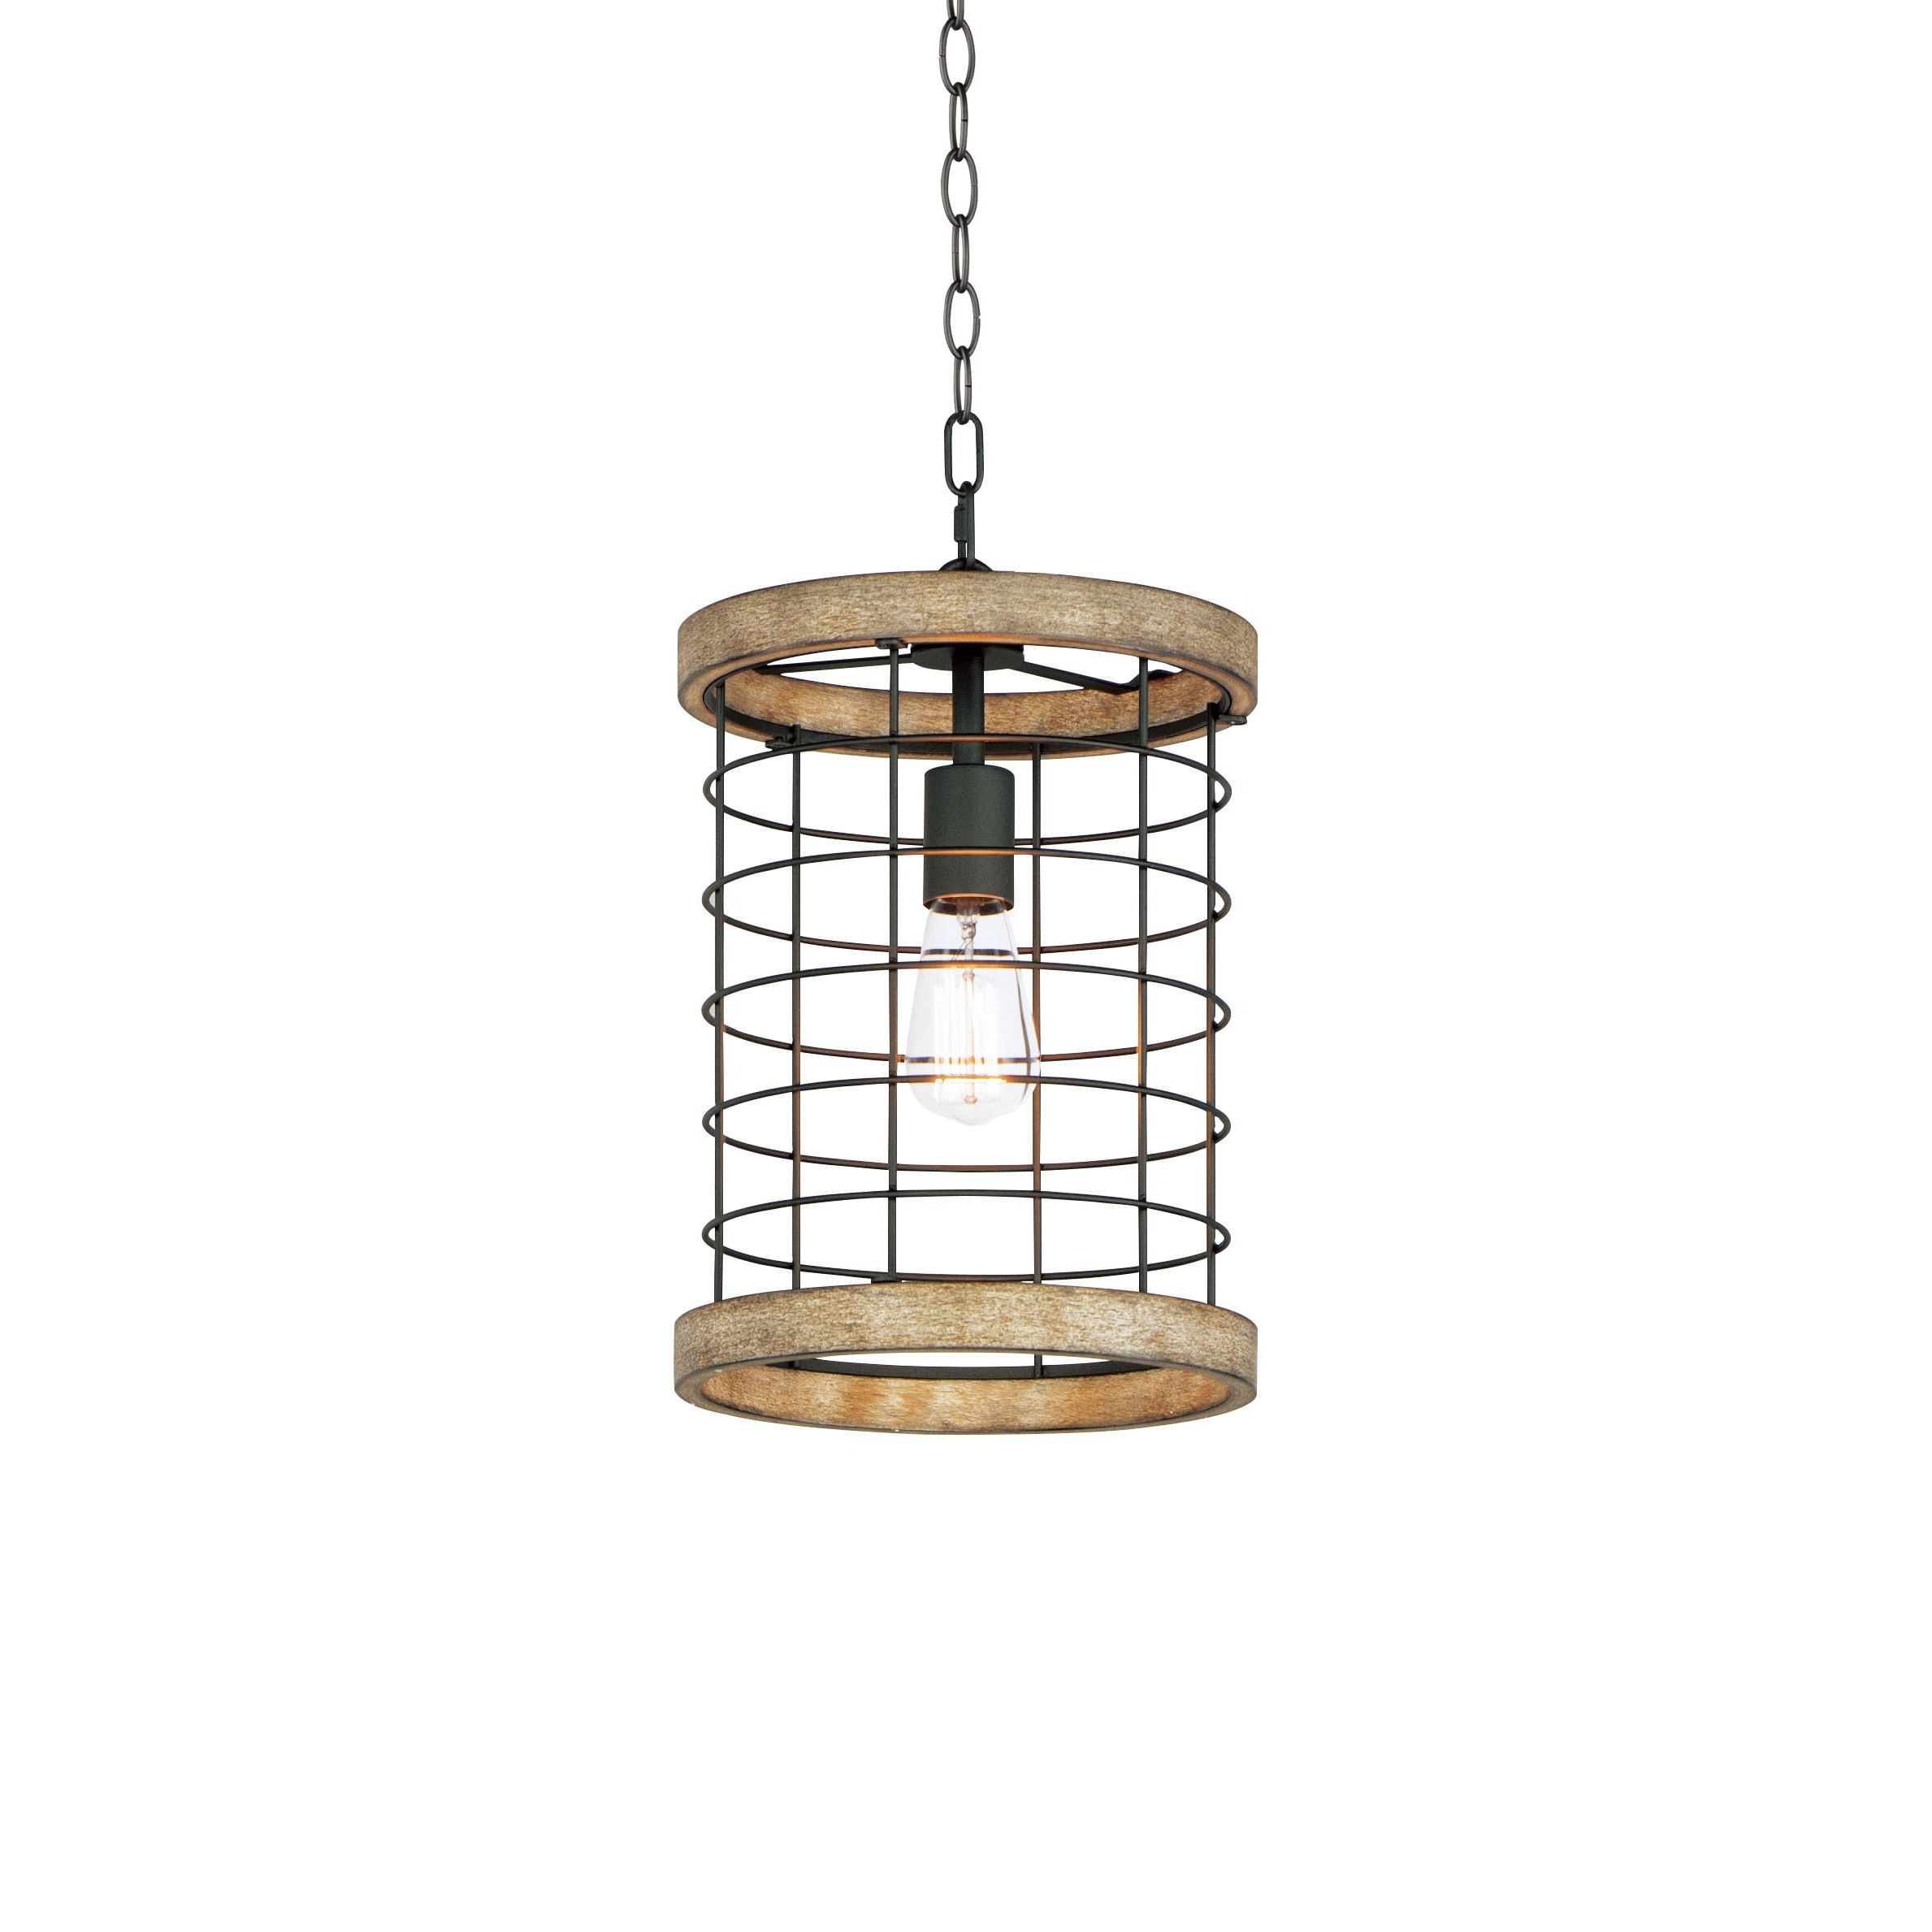 Well Known Weathered Driftwood And Gold Lantern Chandeliers Regarding Maxim Lighting Homestead Driftwood/black Rustic Cylinder Pendant Light In  The Pendant Lighting Department At Lowes (View 11 of 15)